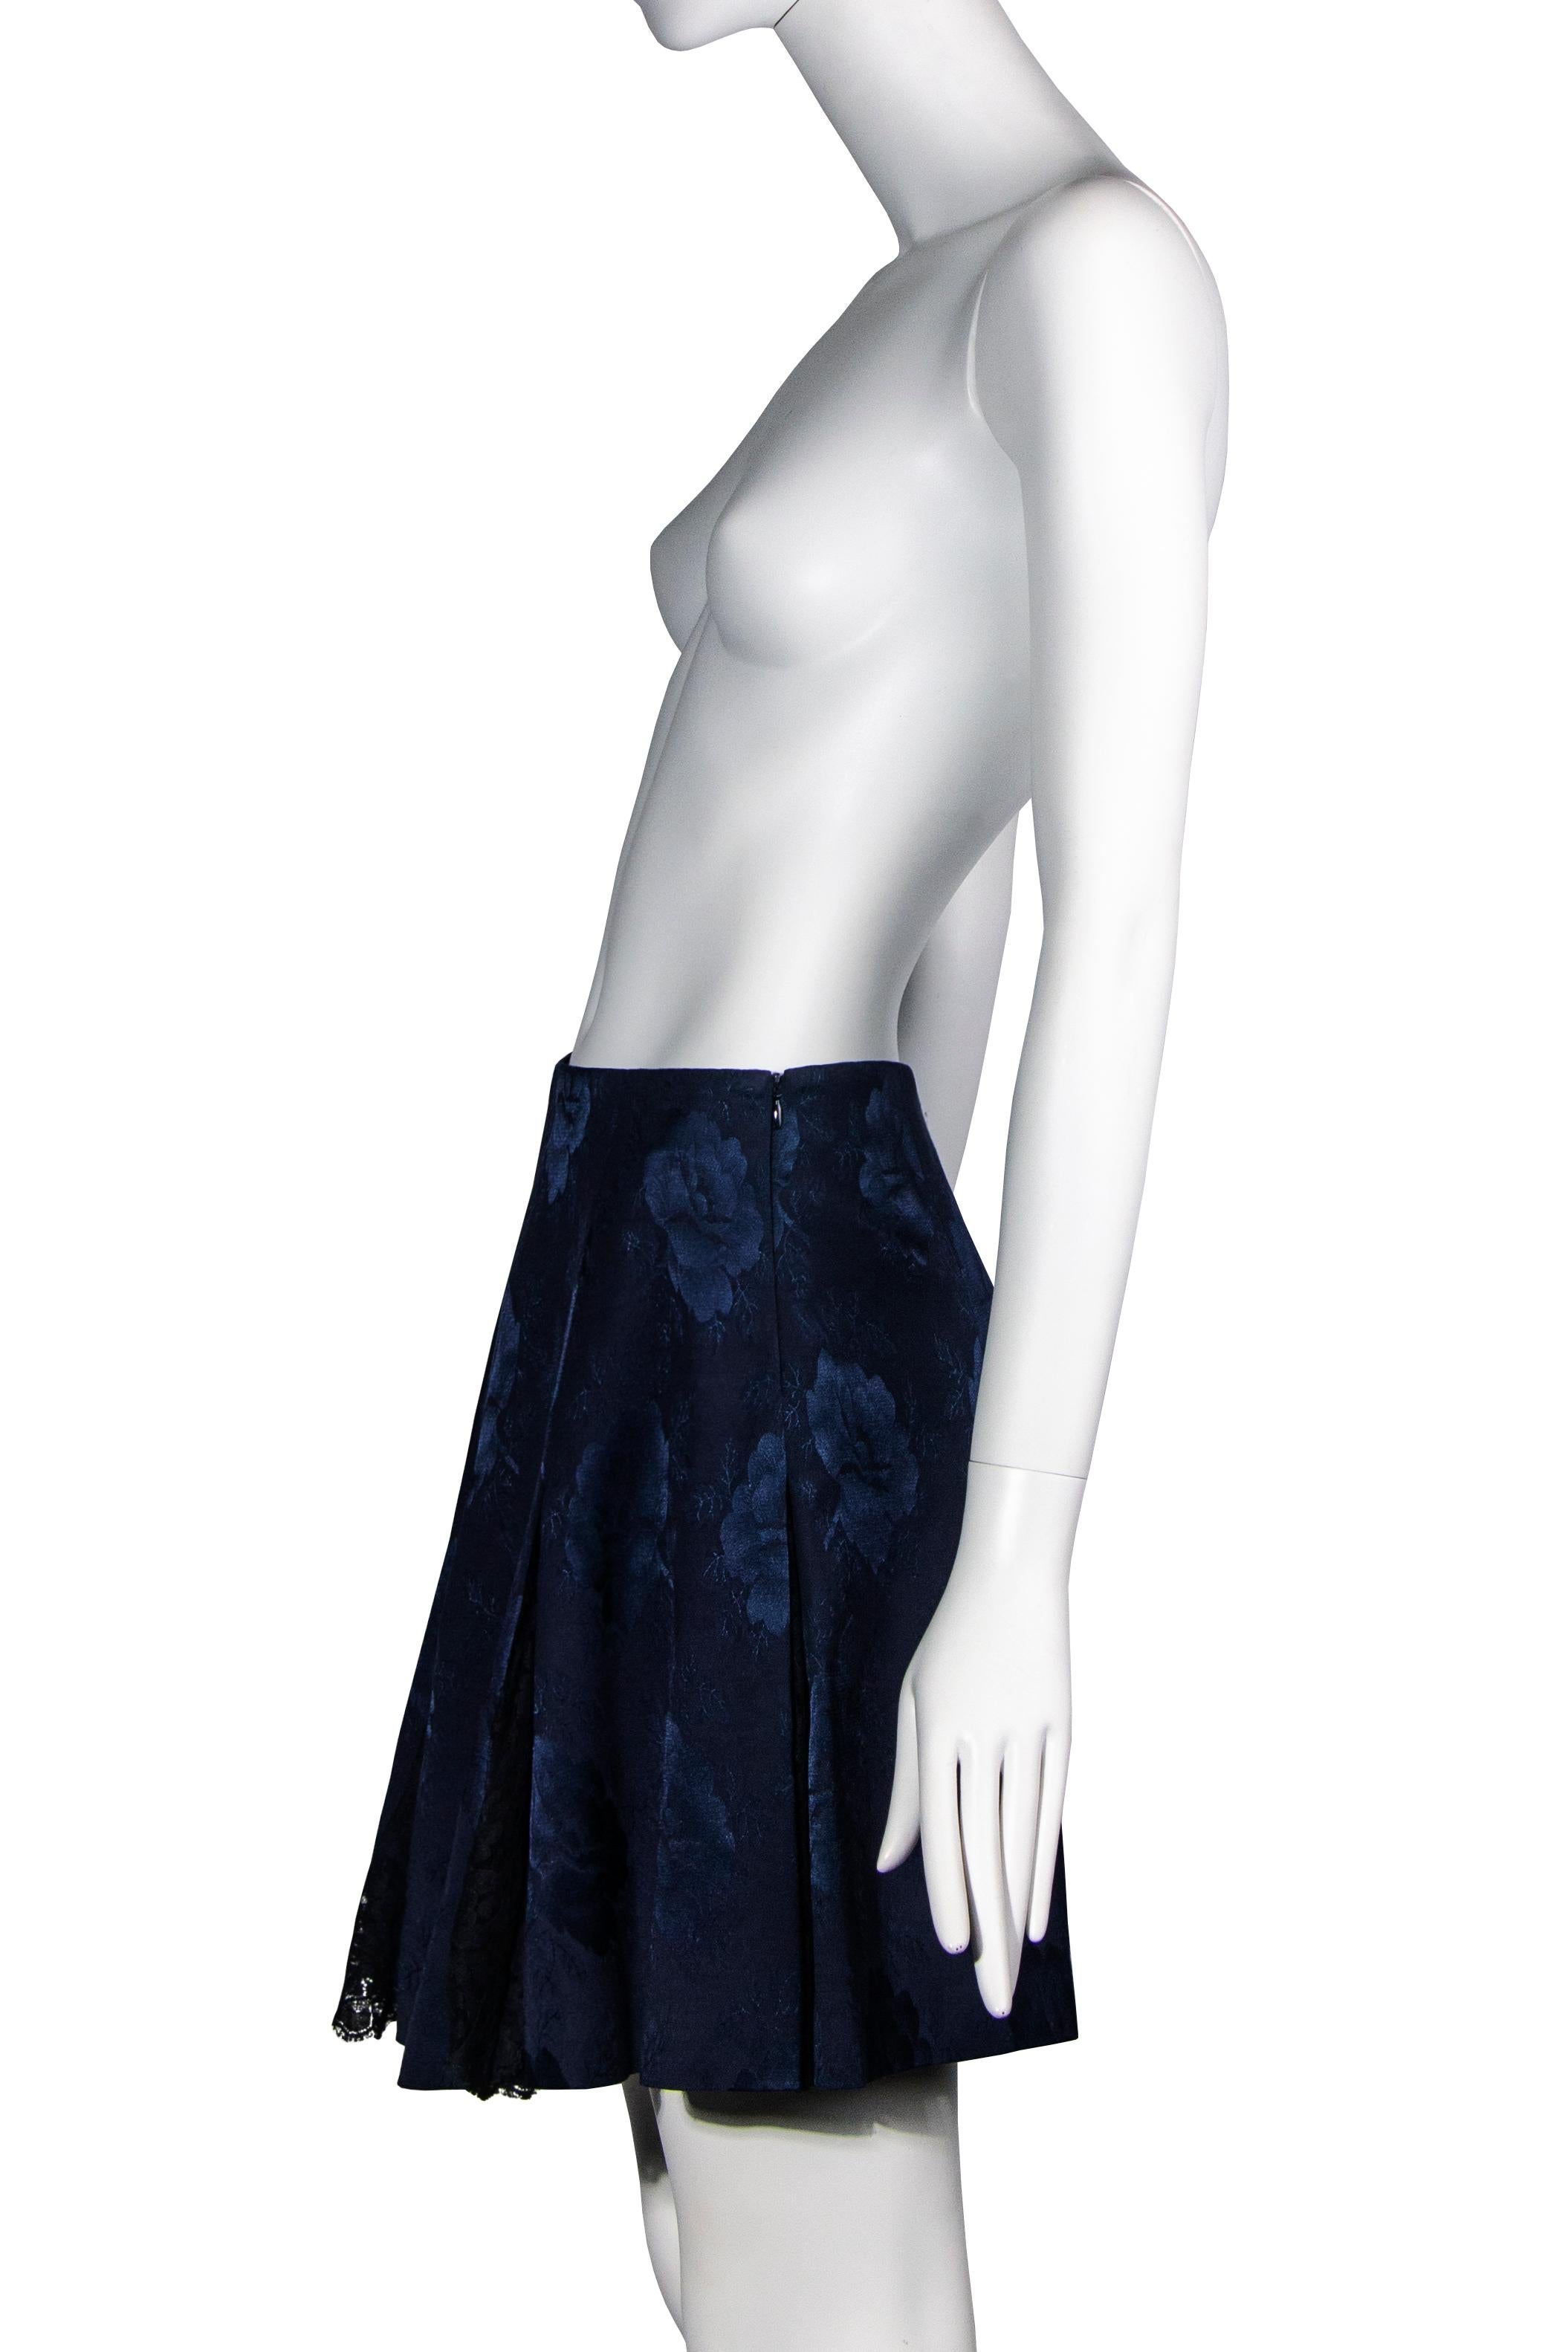 Christian Dior by John Galliano navy silk brocade & lace skirt, fw 1997 For Sale 5